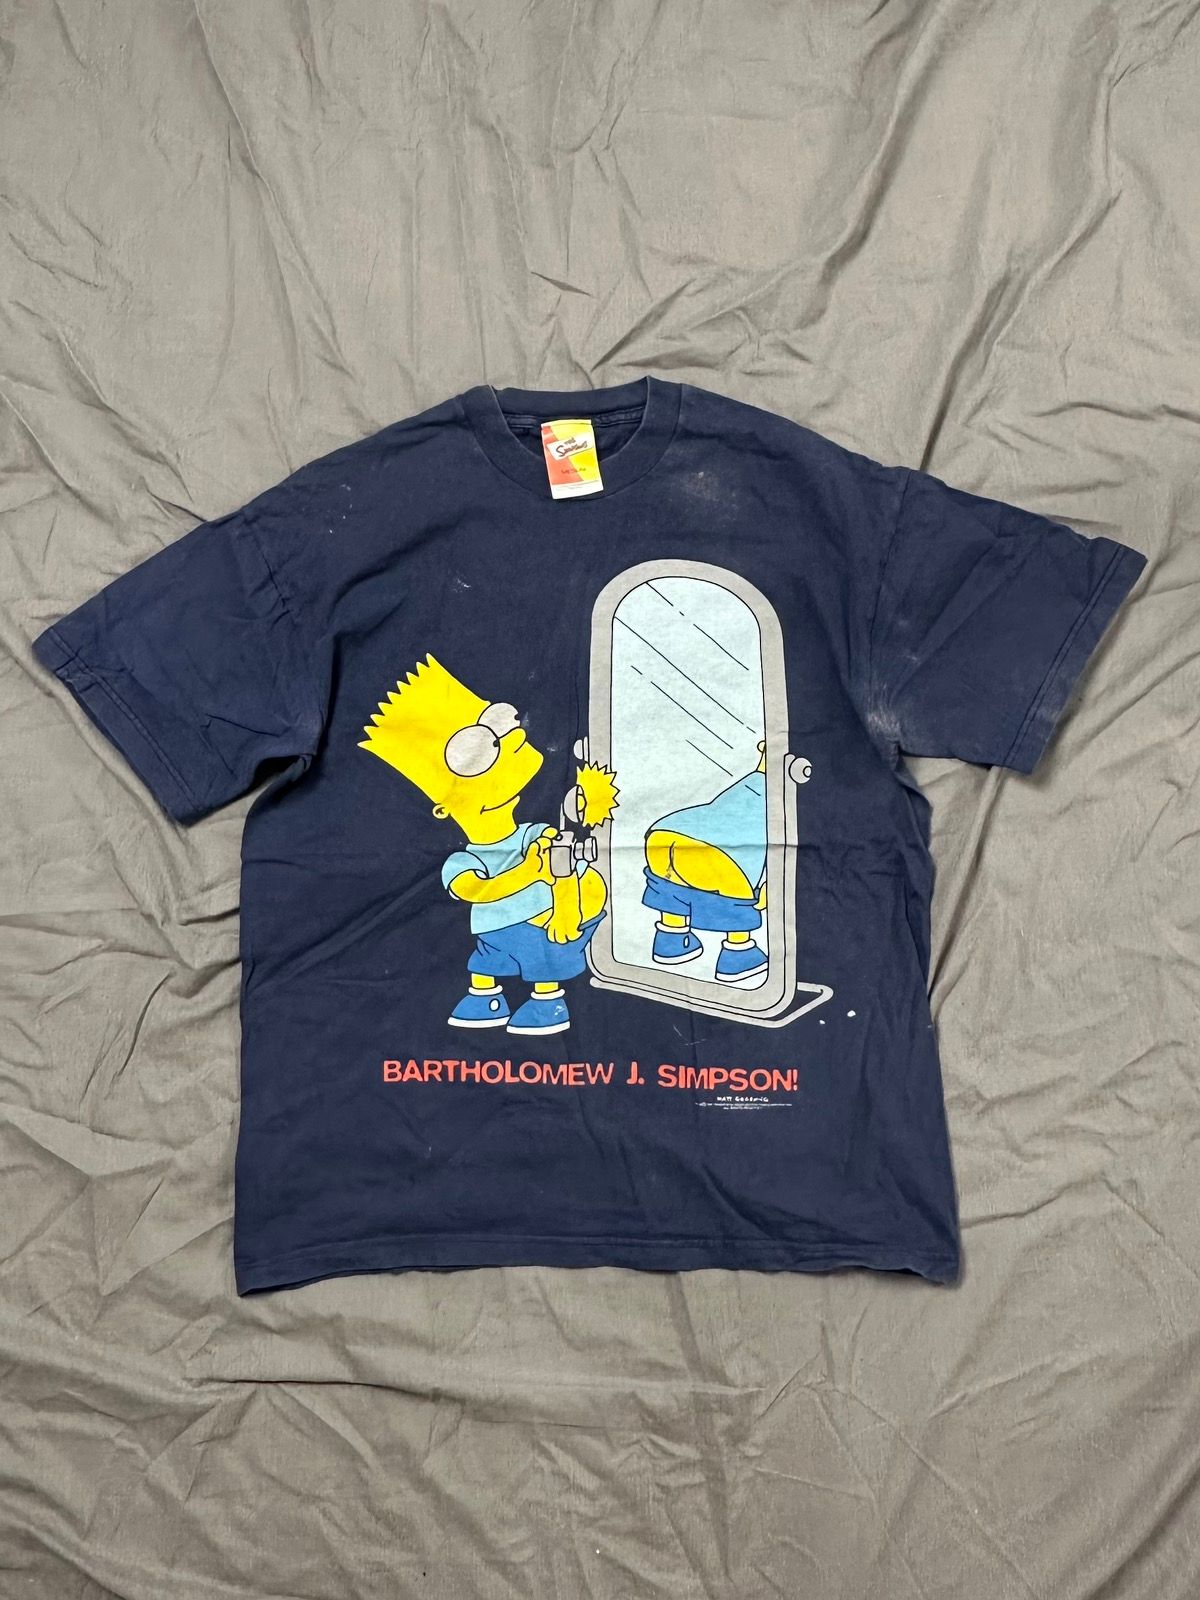 Pre-owned The Simpsons X Vintage Faded 1997 The Simpsons Tee Bart Y2k In Navy